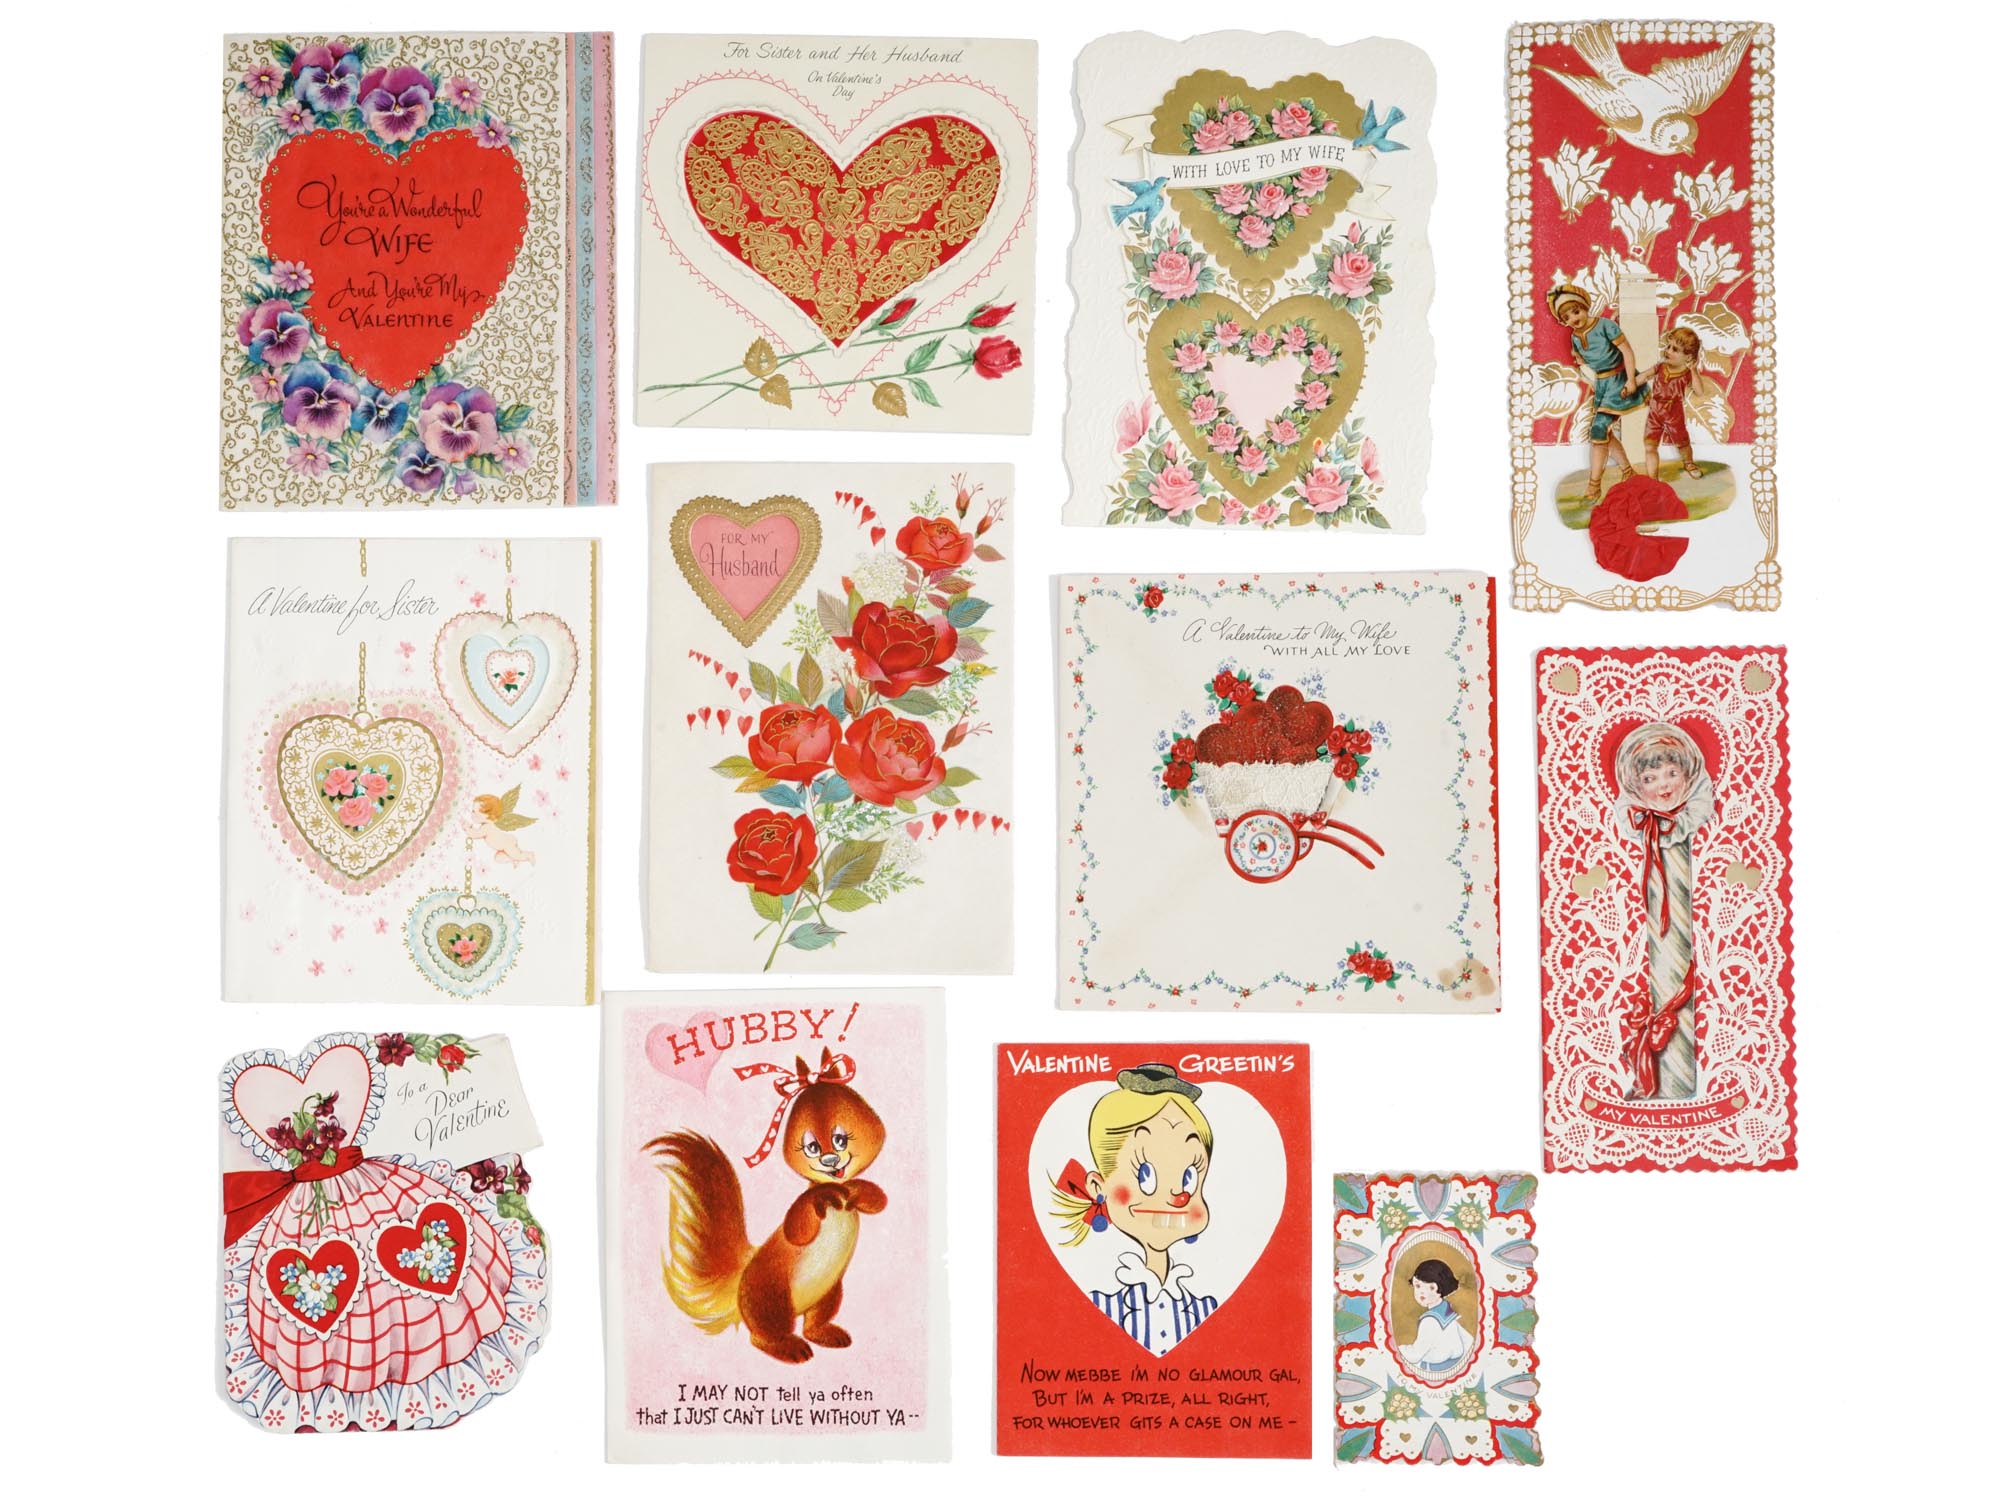 ANTIQUE VALENTINES DAY CARDS COLLECTION IN ALBUM PIC-2